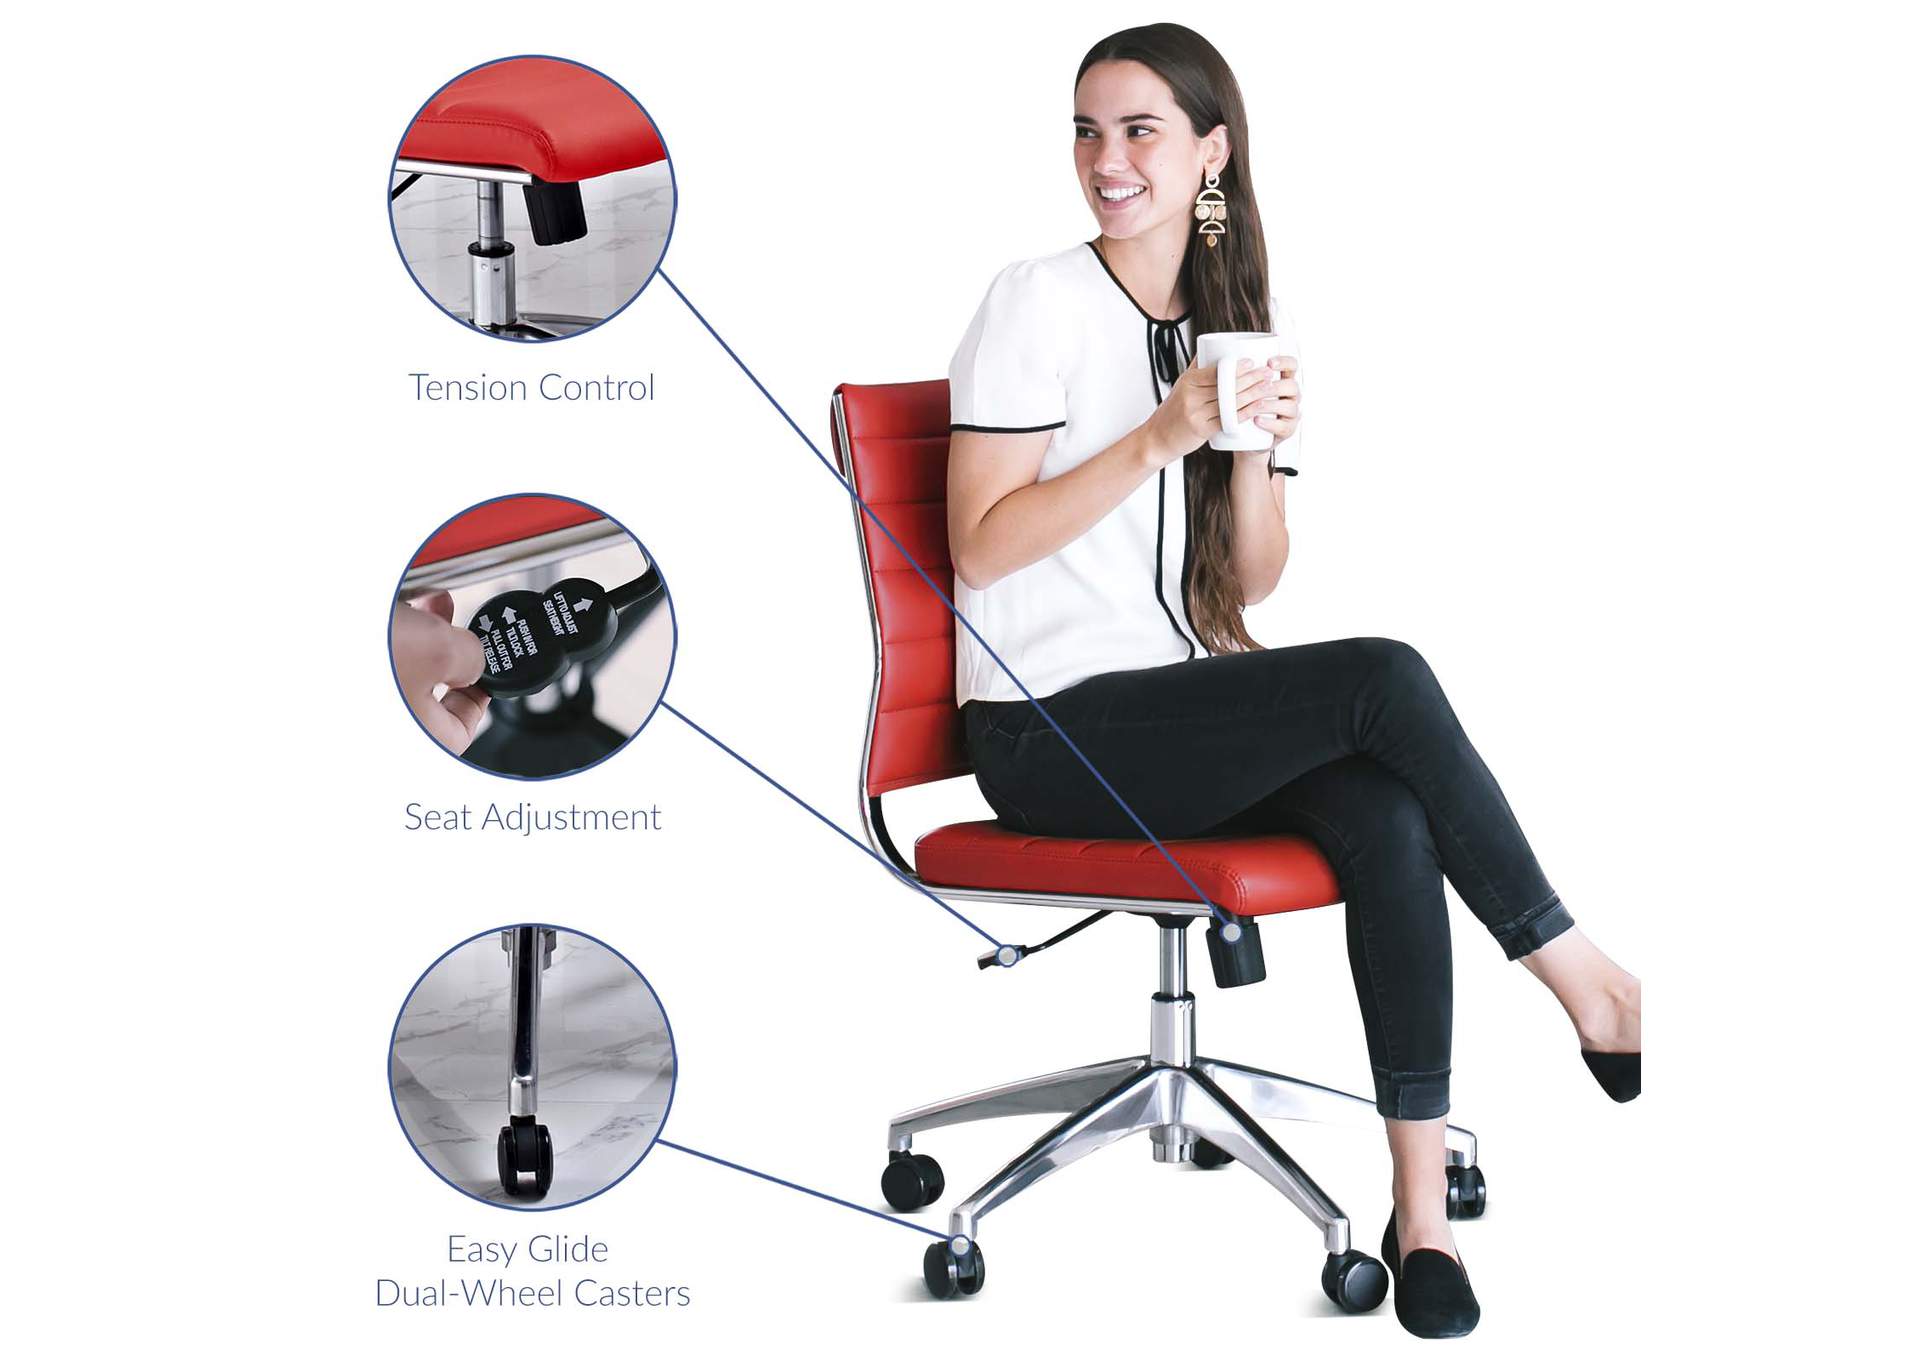 Jive Red Armless Mid Back Office Chair,Modway